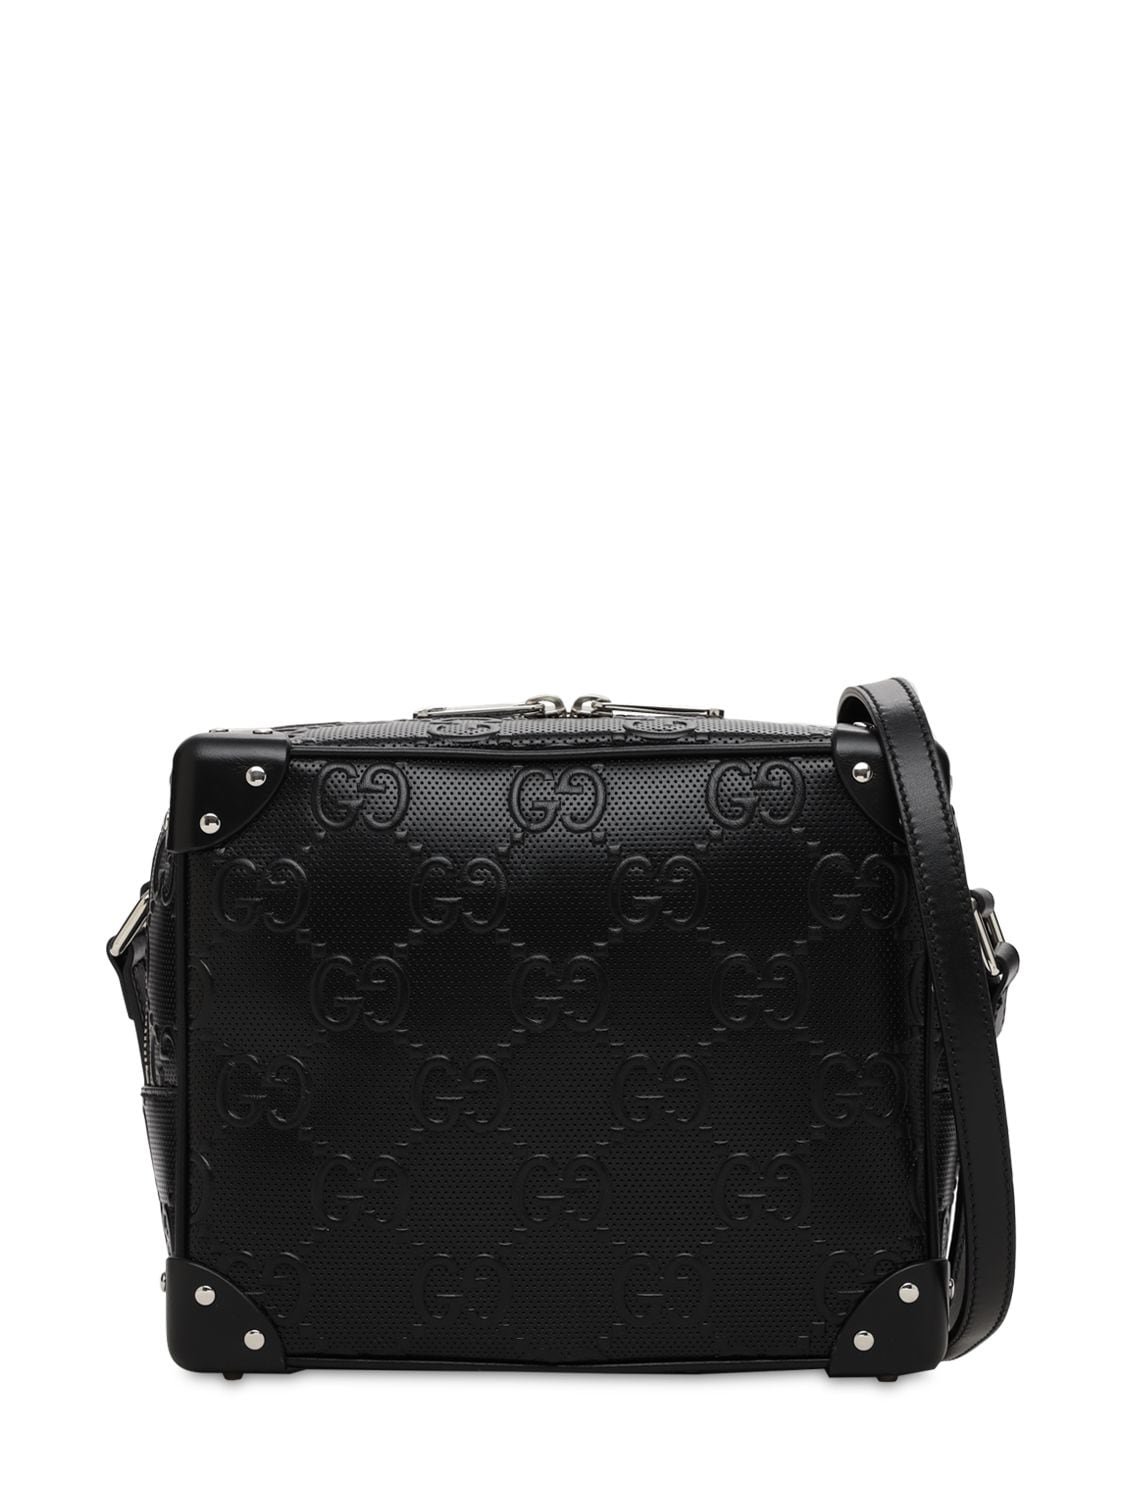 Gucci Gg Embossed Leather Crossbody Bag In Black